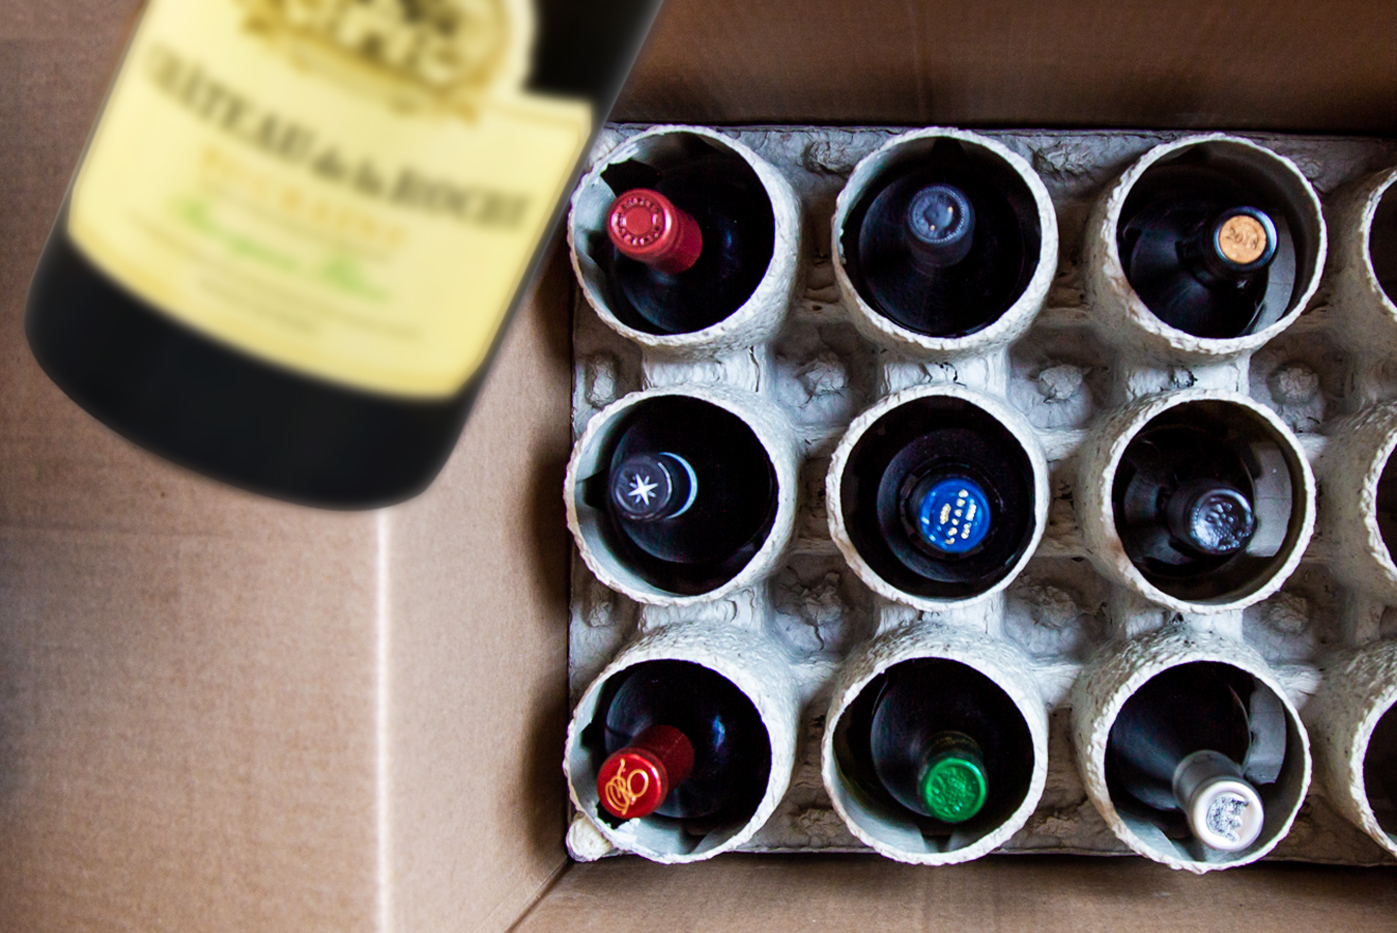 Discounts on Great Wines Arriving February 20-22: Presenting the 12 for $150 Case Sale